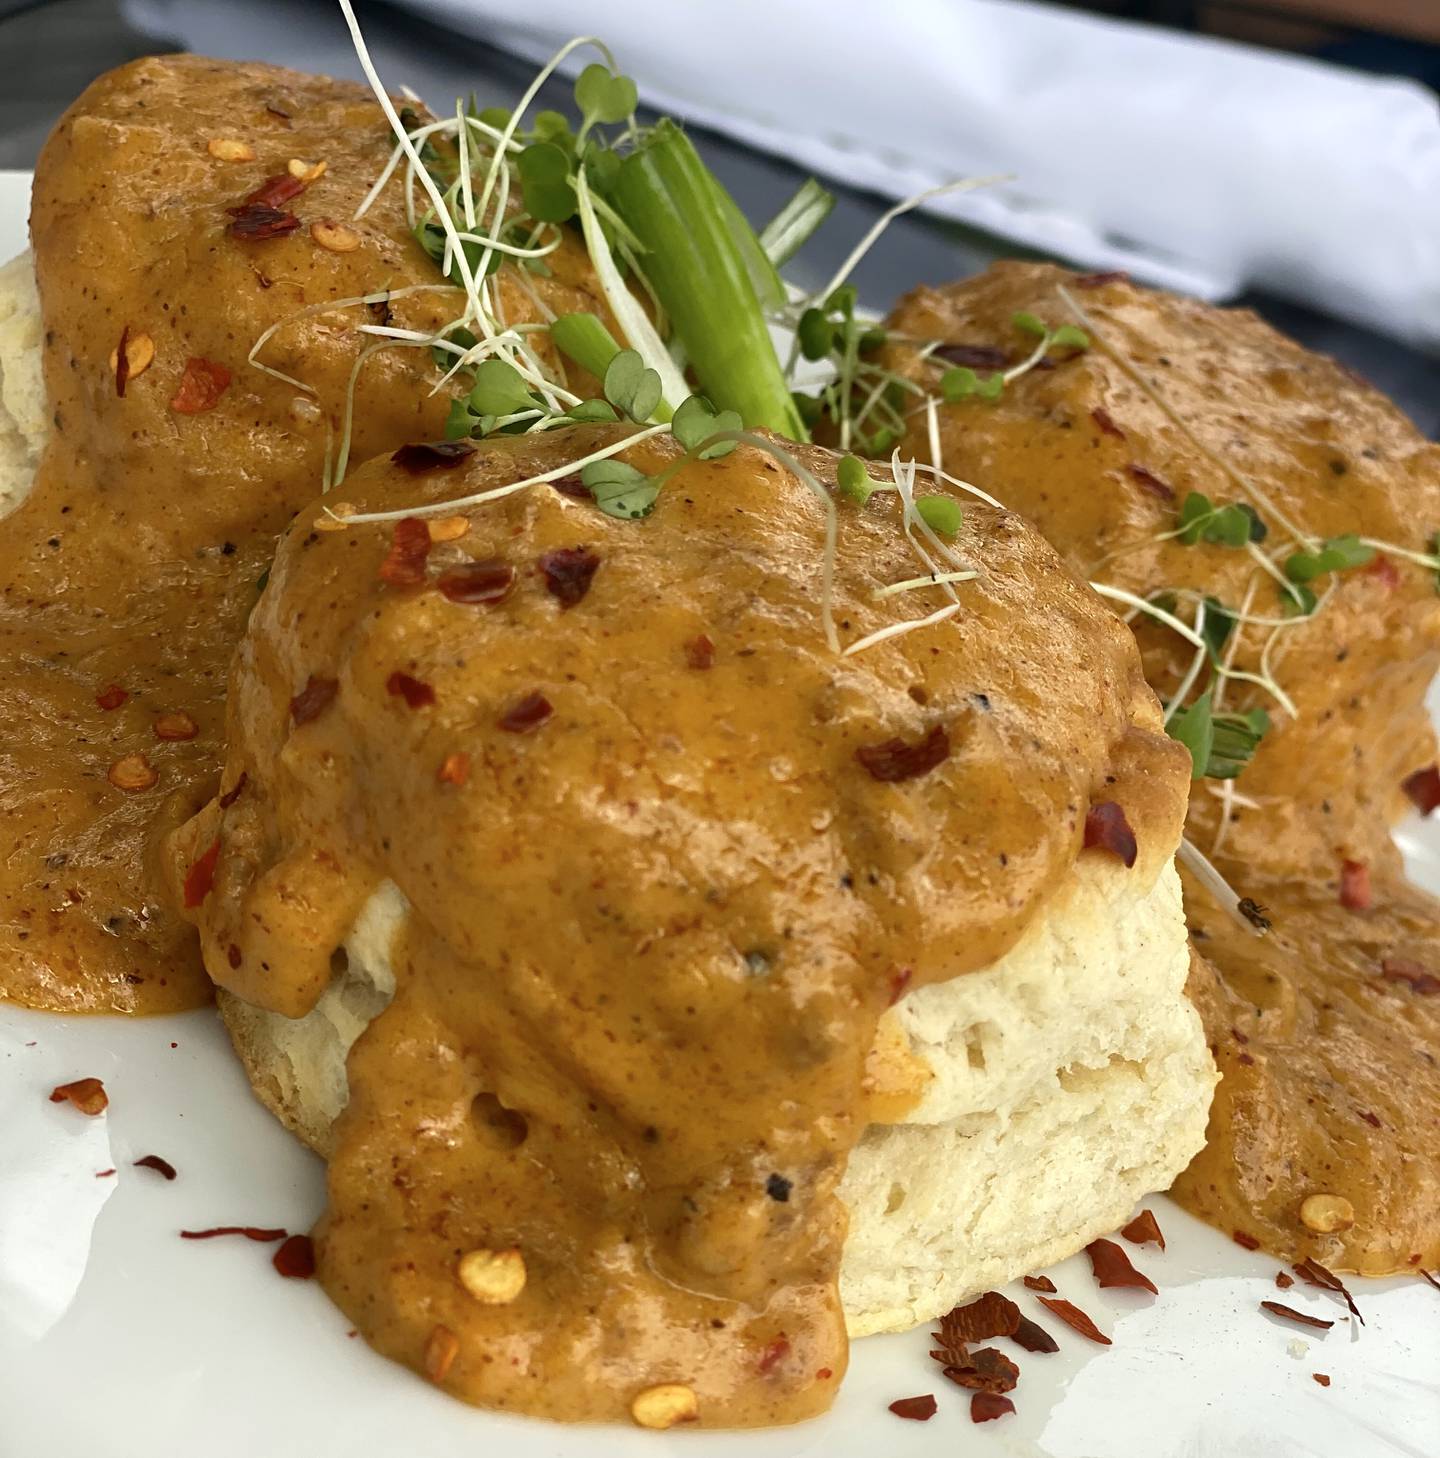 The biscuits and gravy at Launch Kitchen are served with a red gravy and chorizo.